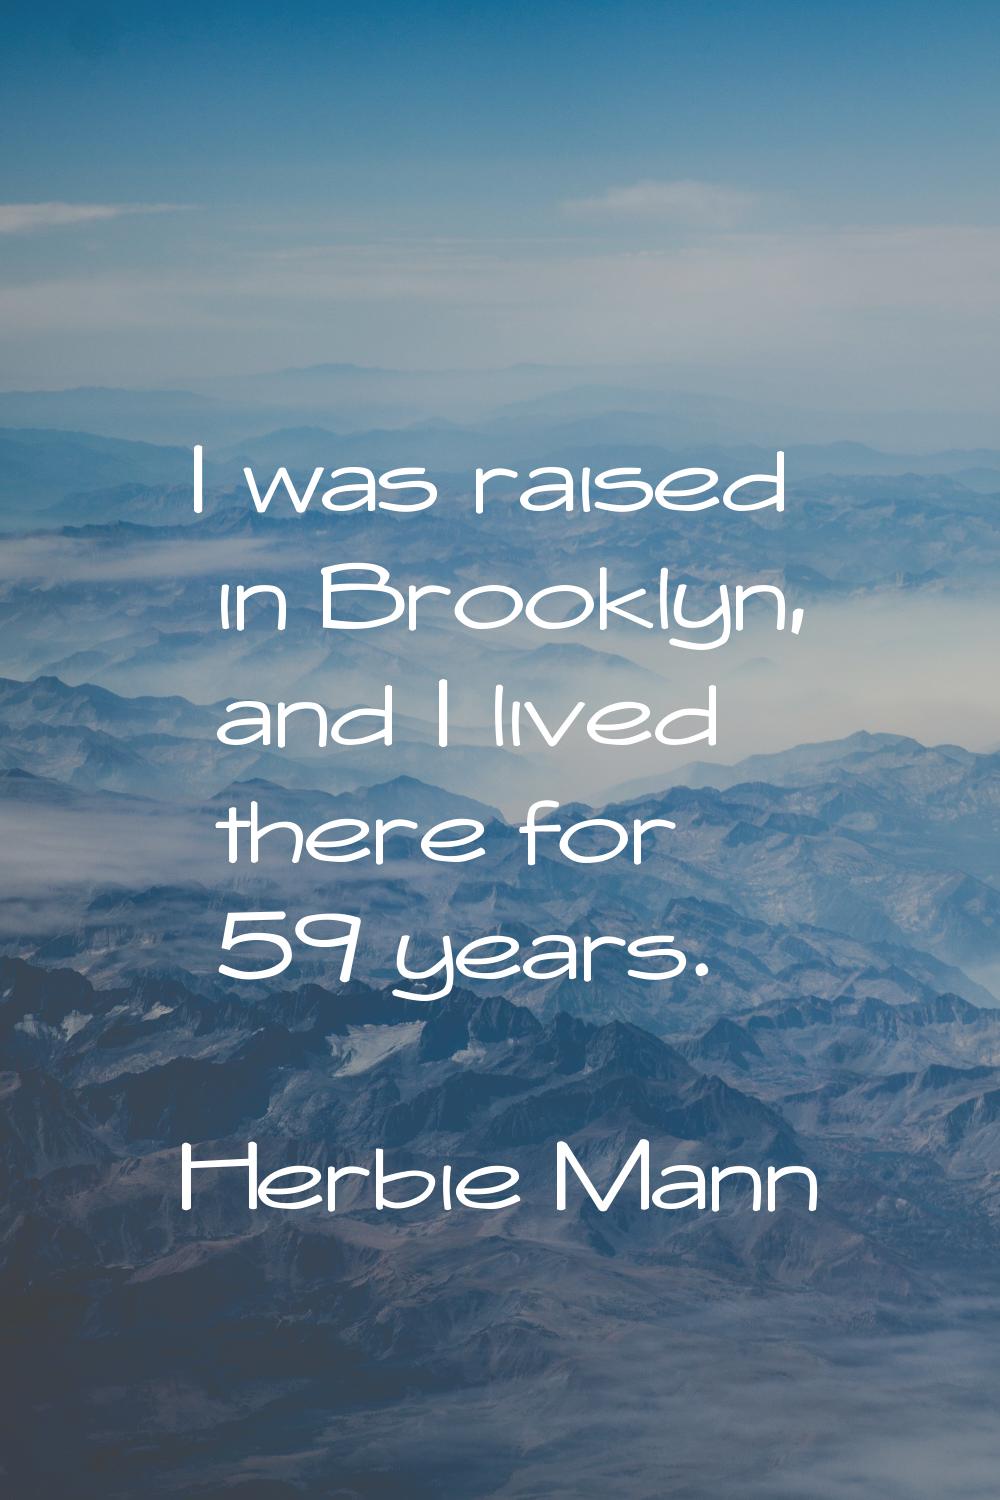 I was raised in Brooklyn, and I lived there for 59 years.